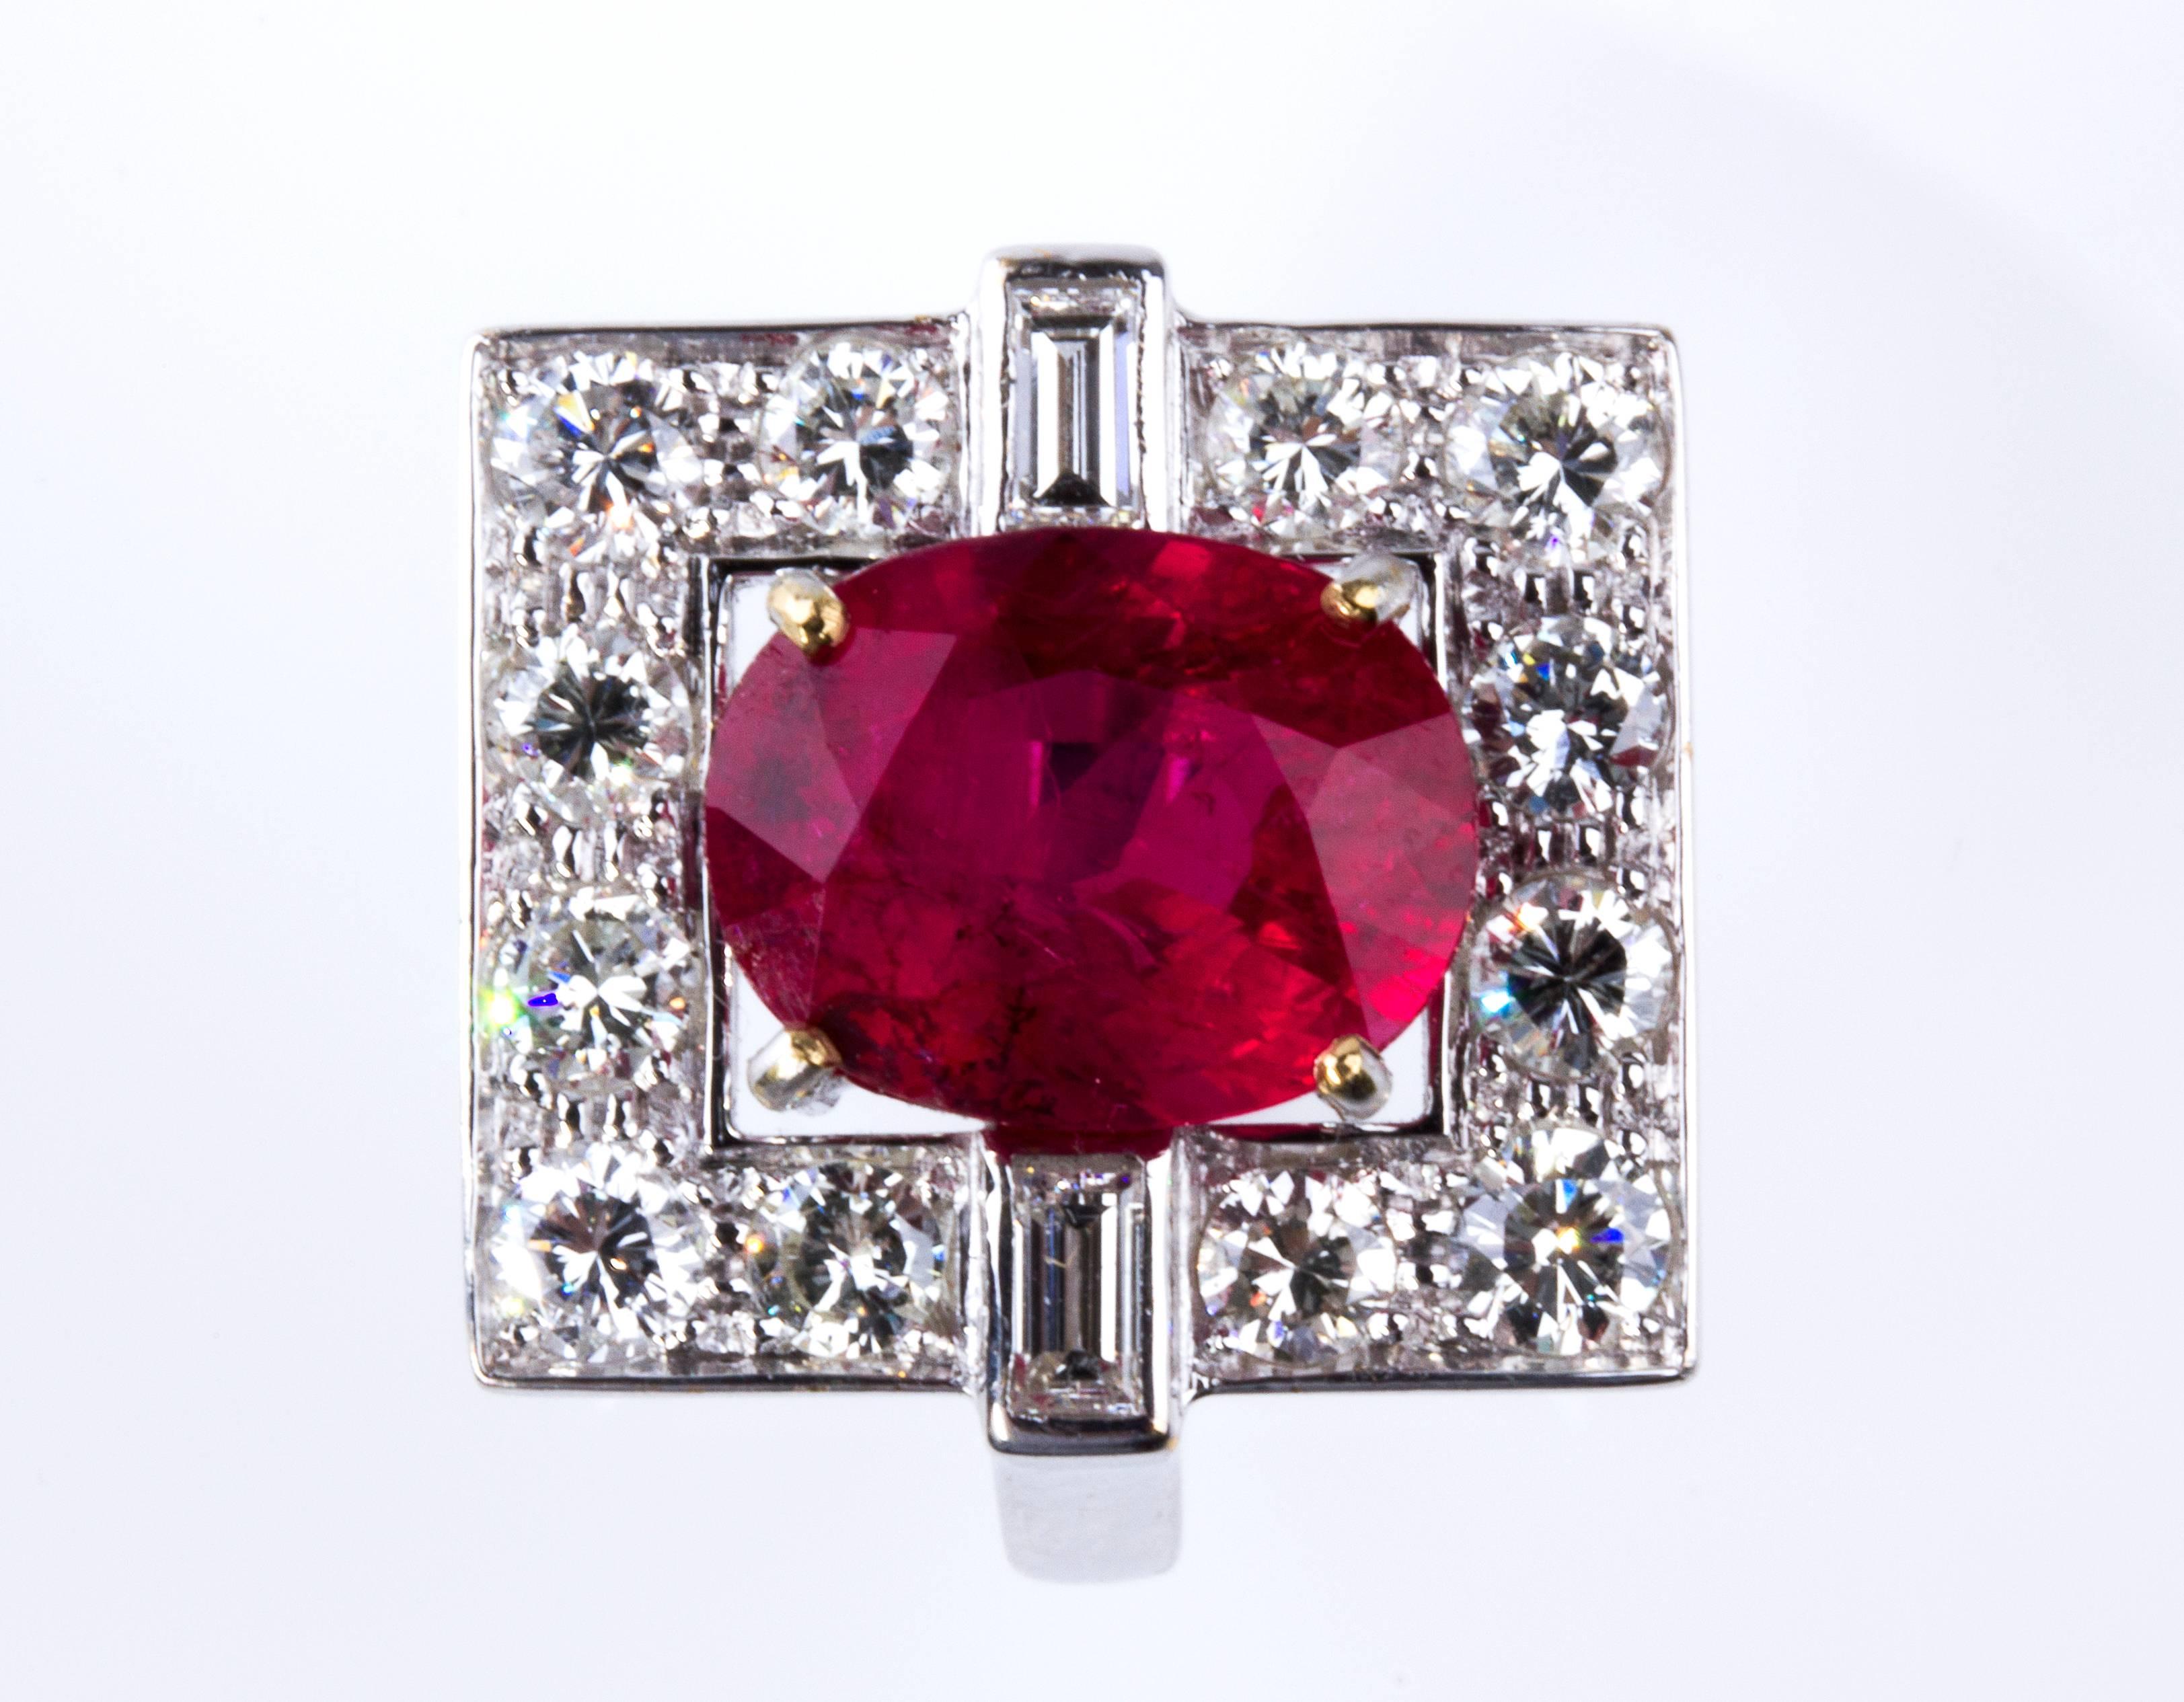 Realized in white gold designed with geometric motif, set cushion shaped ruby weighing 4.90 ct; surrounded by twelve brilliant cut diamonds, VVS clarity, F/G color, weighing 1.20 ct and two rectangular shaped diamonds, VVS clarity, F/G color,